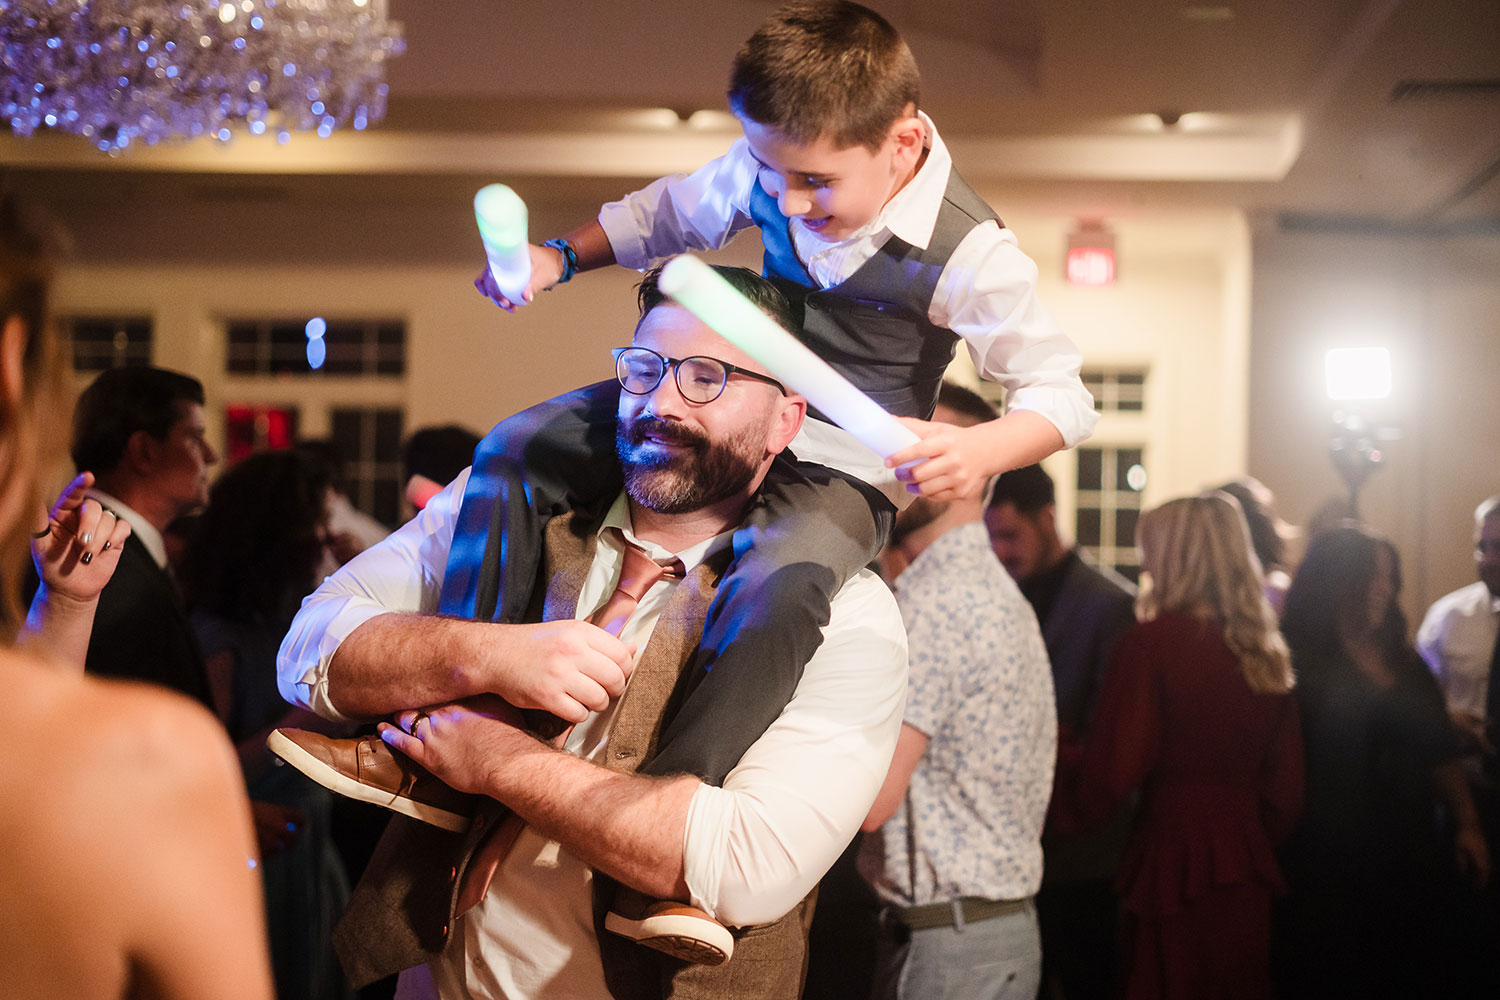 Groom partying with nephew during the reception at Ruffled Feathers Country Club in Lemont, IL